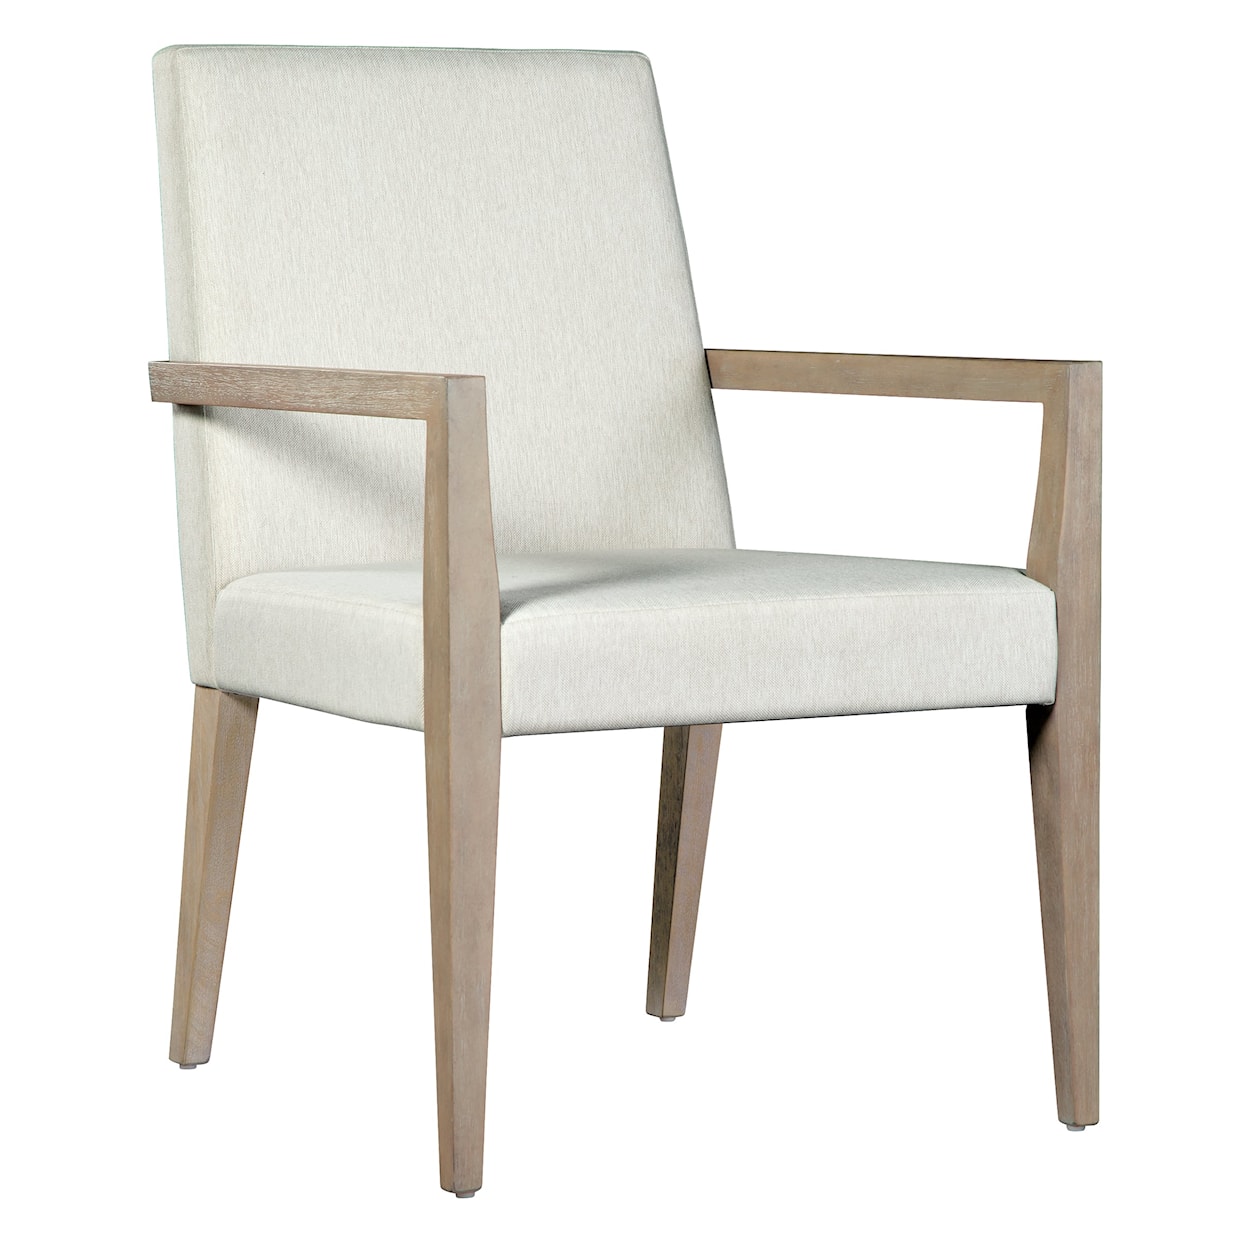 Hekman Scottsdale Upholstered Dining Arm Chair